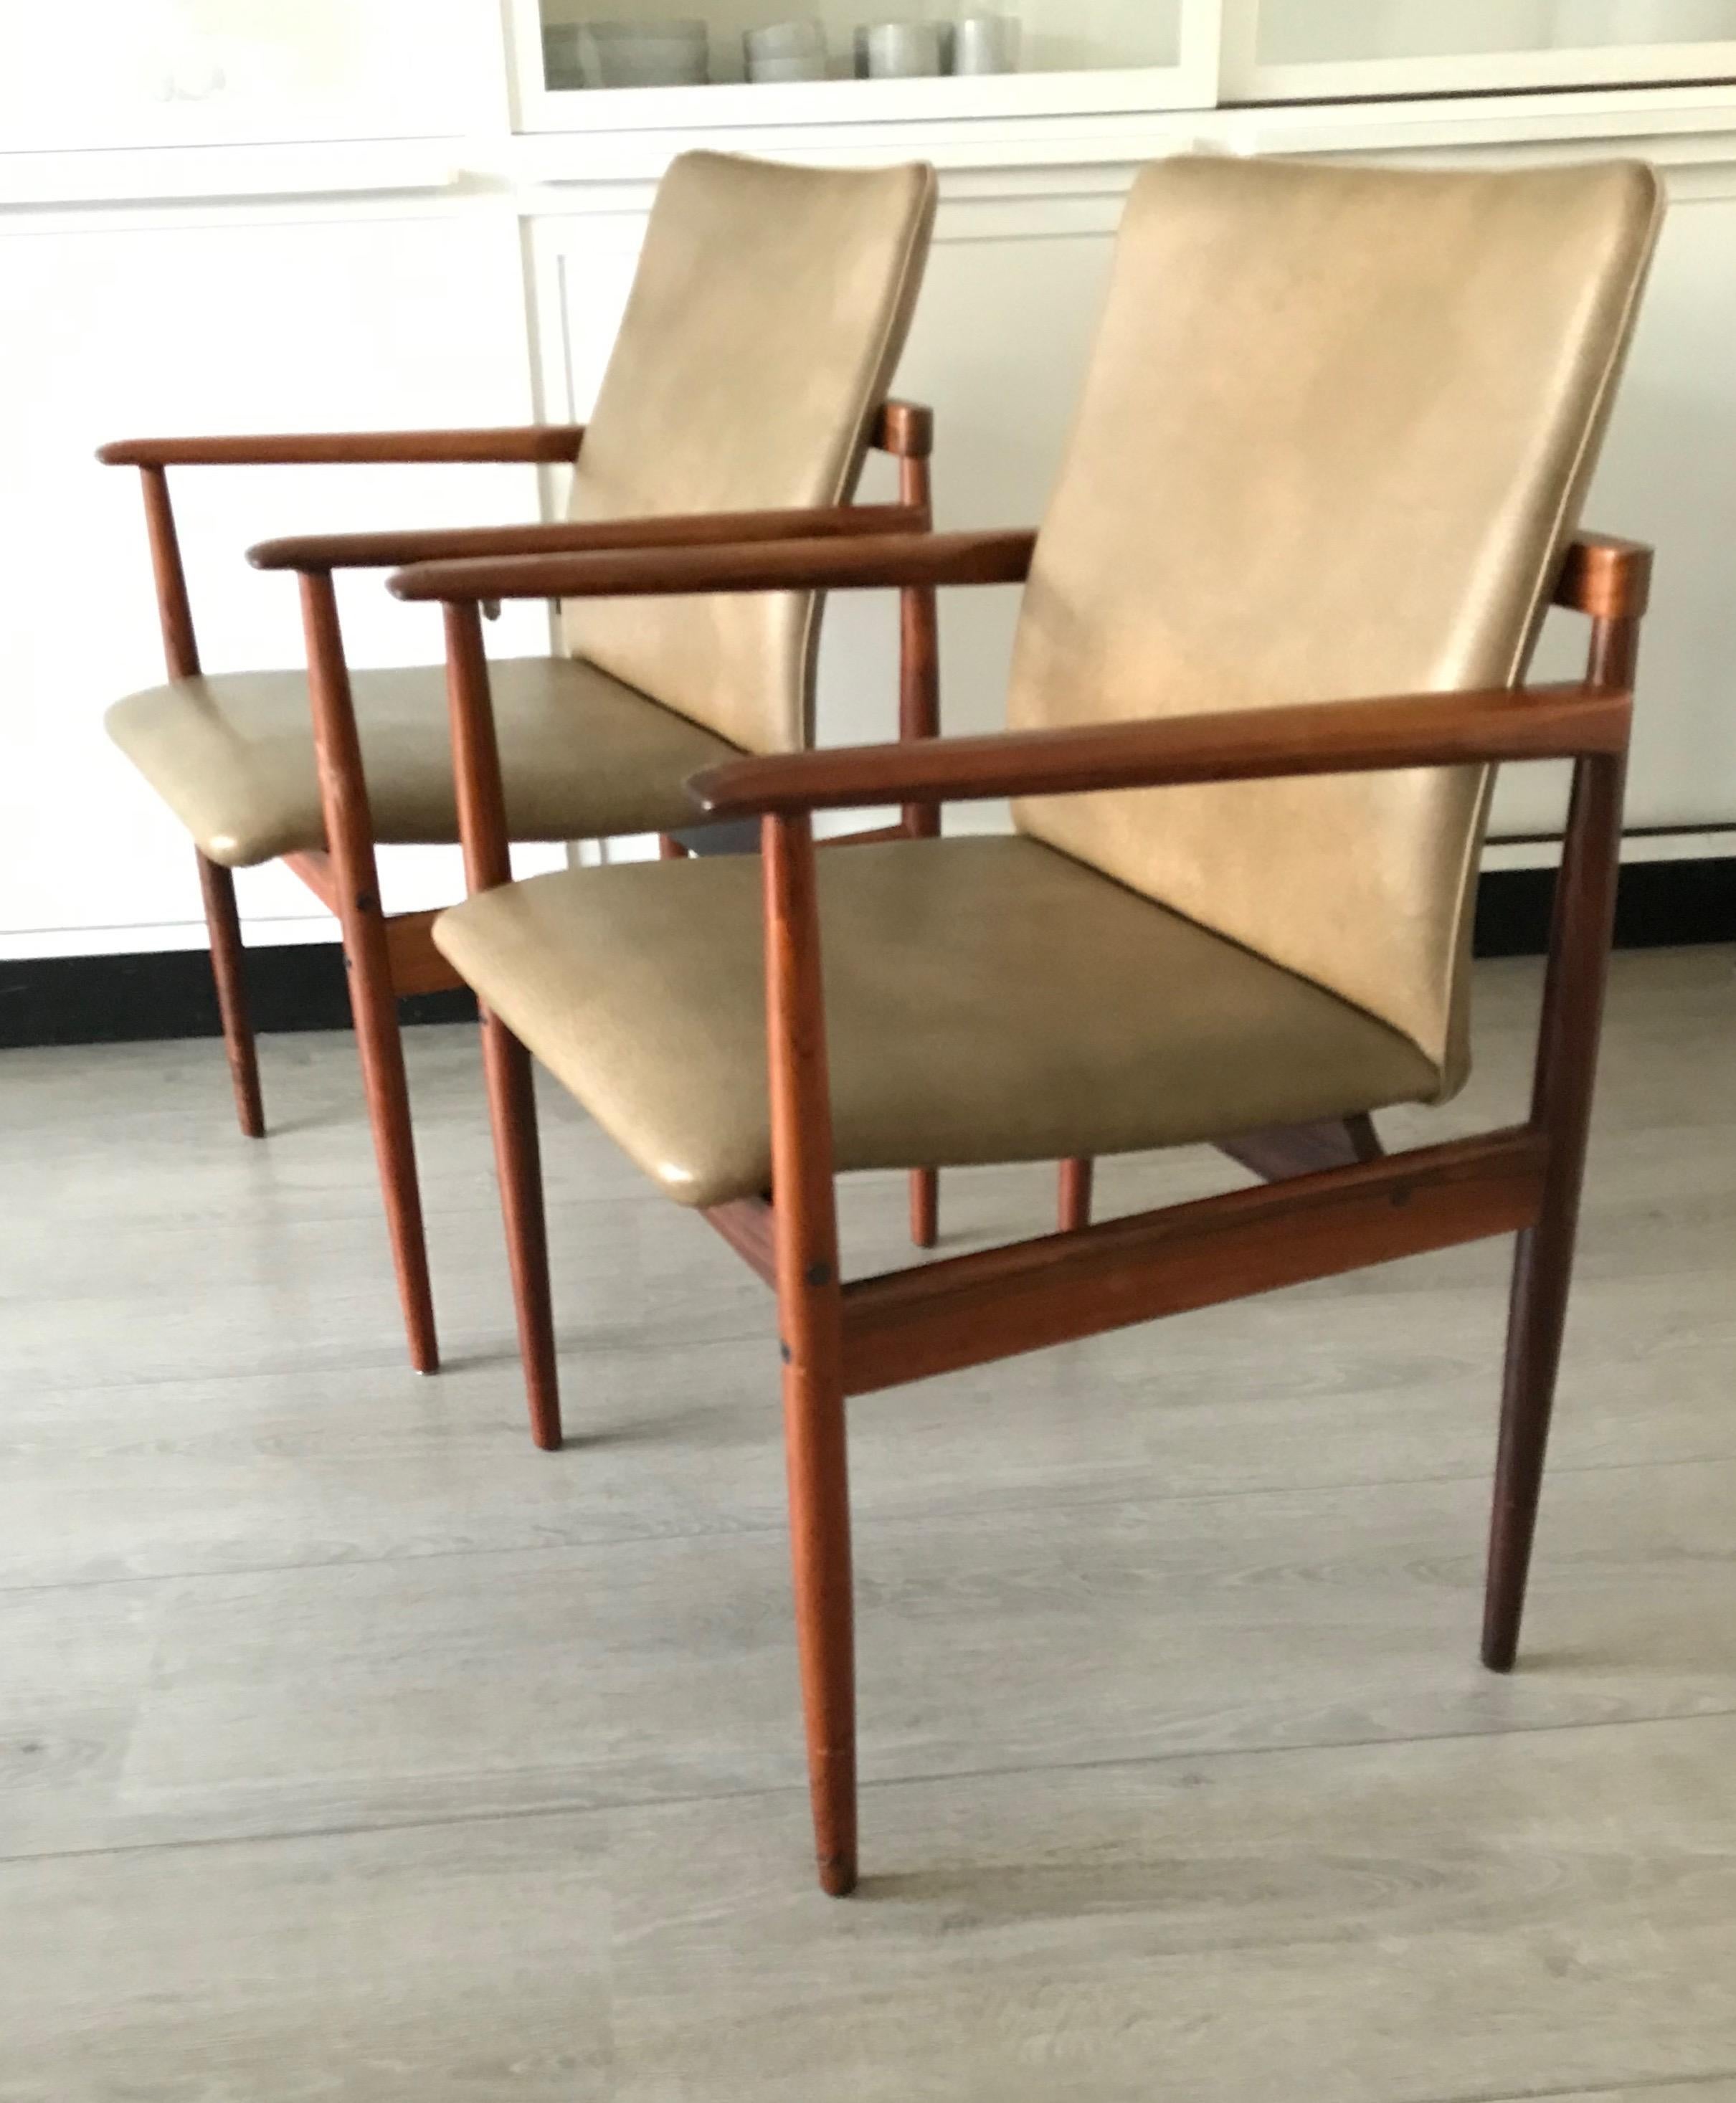 Hand-Crafted Stunning & Stylish Pair of Handcrafted Midcentury Modern Solid Wooden Armchairs For Sale